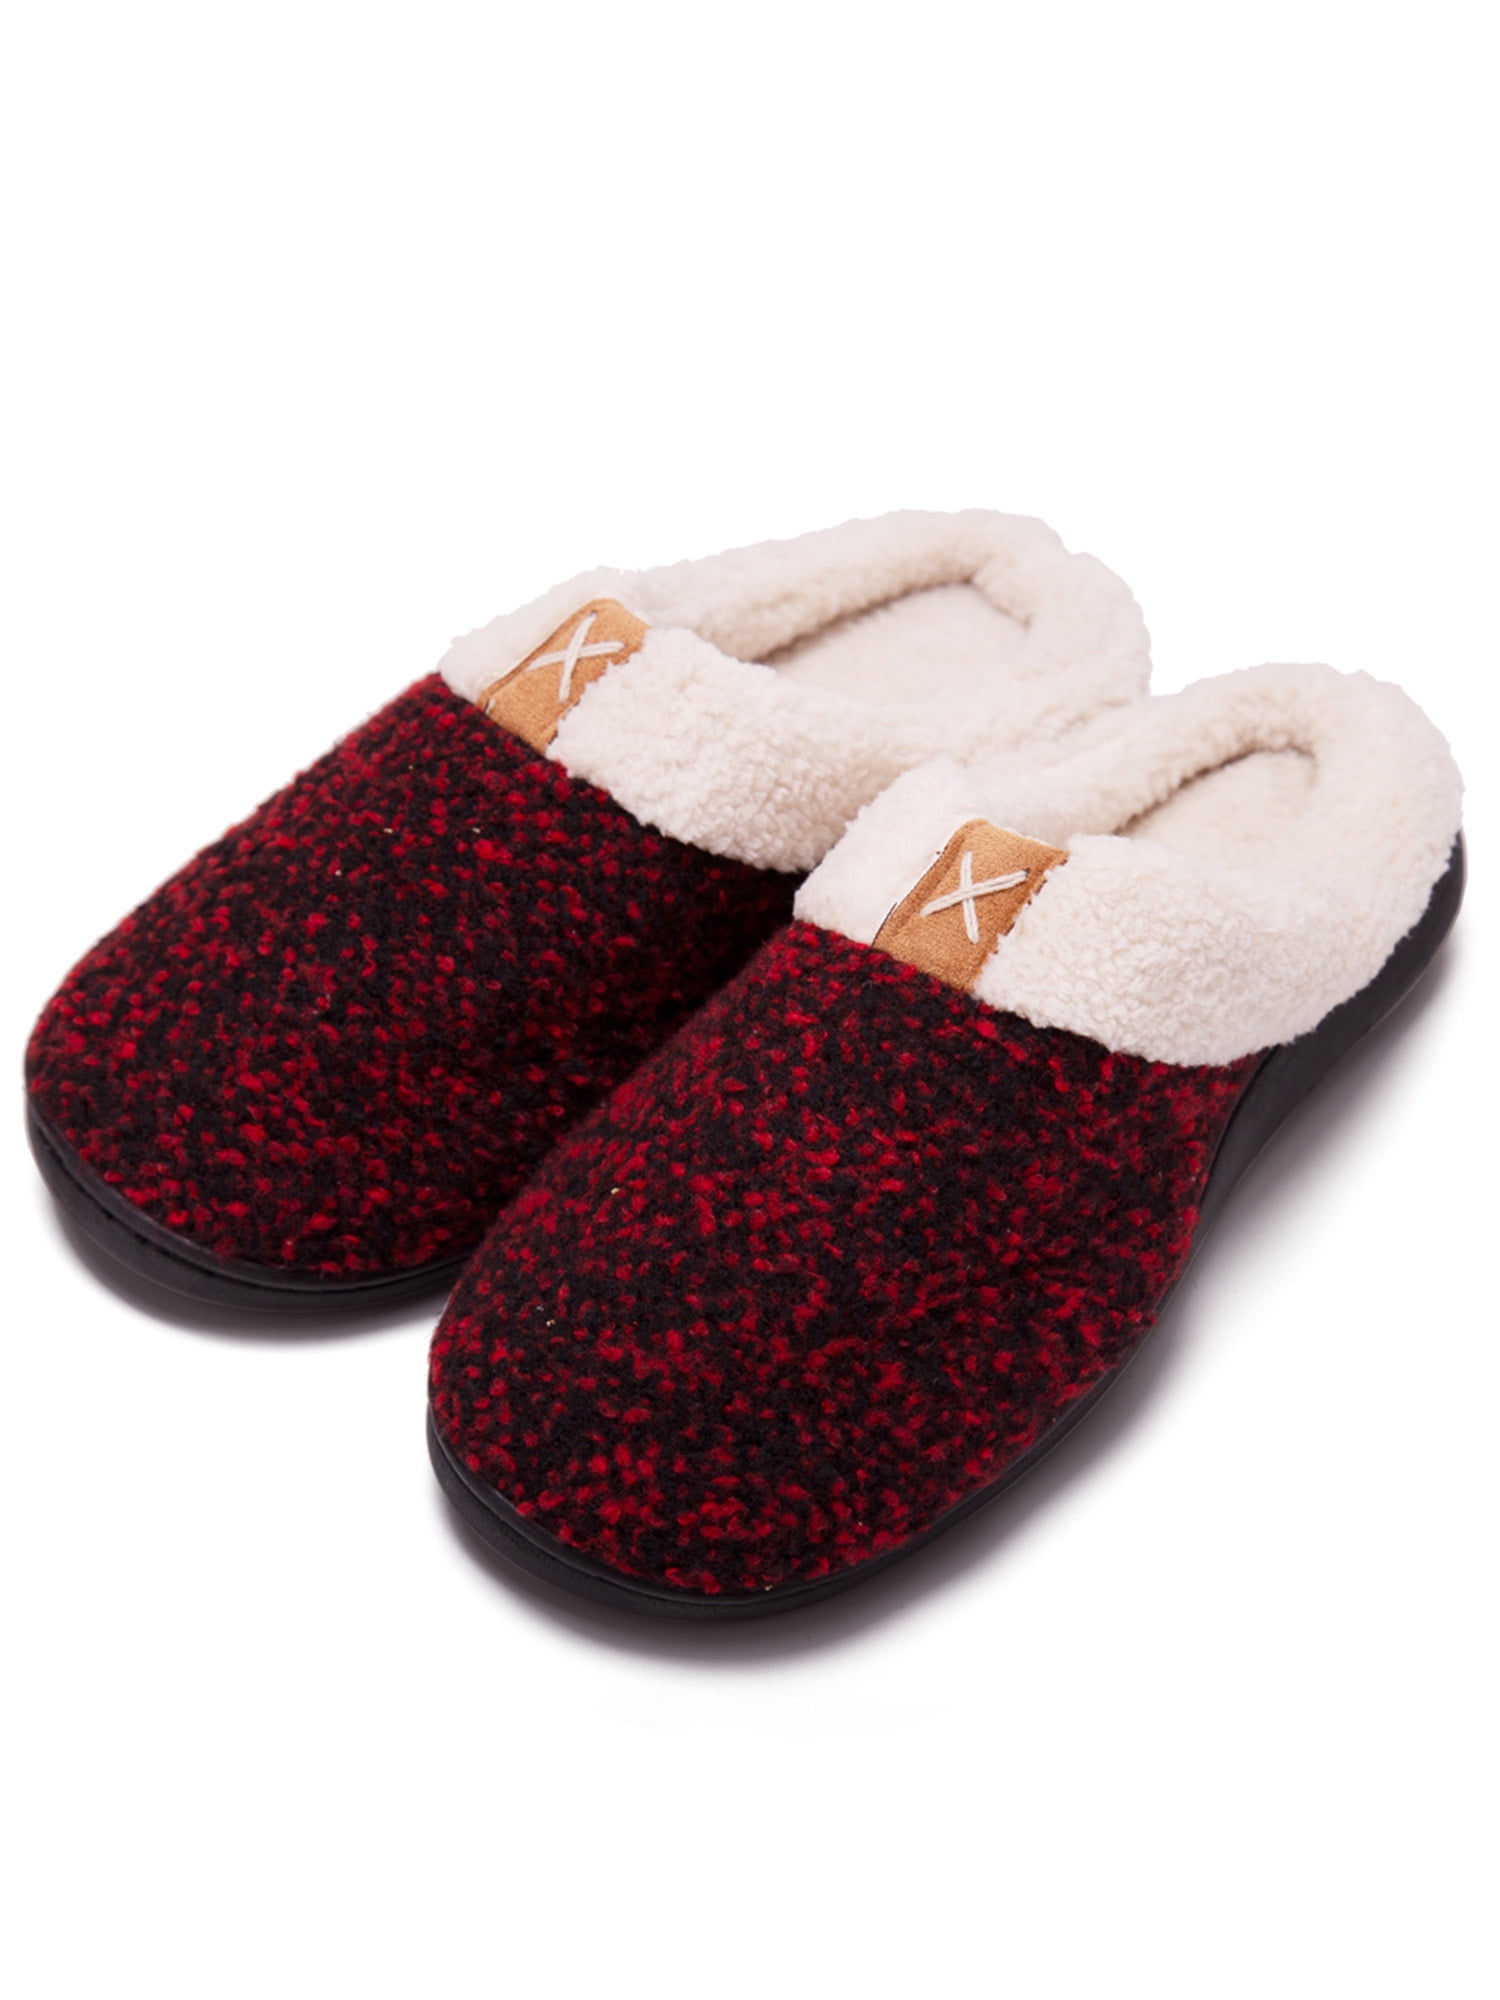 DUNLOP Womens Ladies Warm Cute Luxury Fluffy Comfy Knitted Home Slippers 